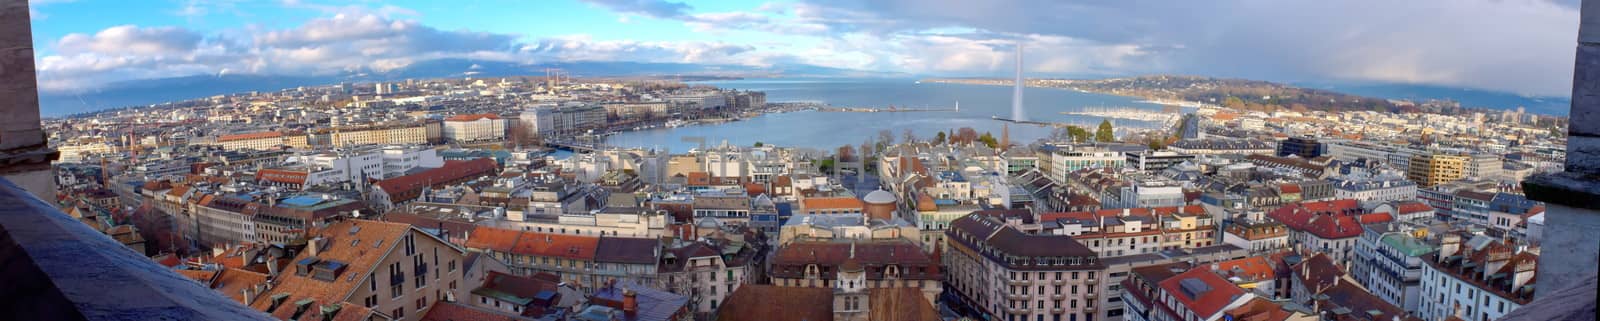 Panorama of Geneva city by beautiful day from cathedral famous Saint-Pierre, Switzerland (HDR)